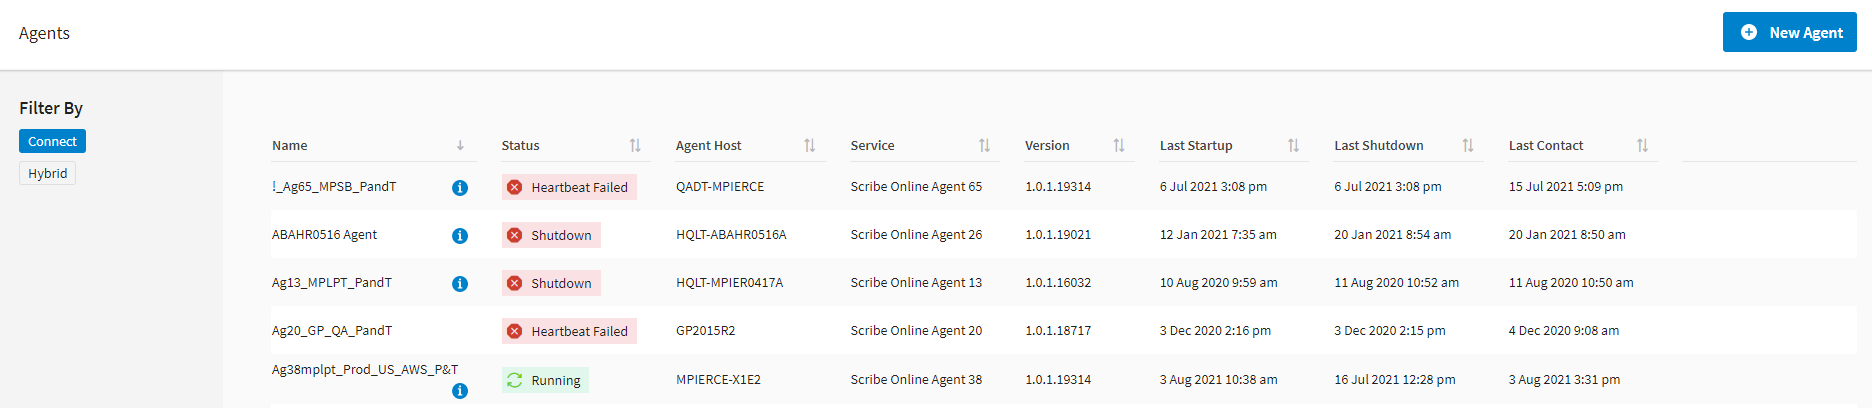 Agent page displaying all installed agents for selected organization